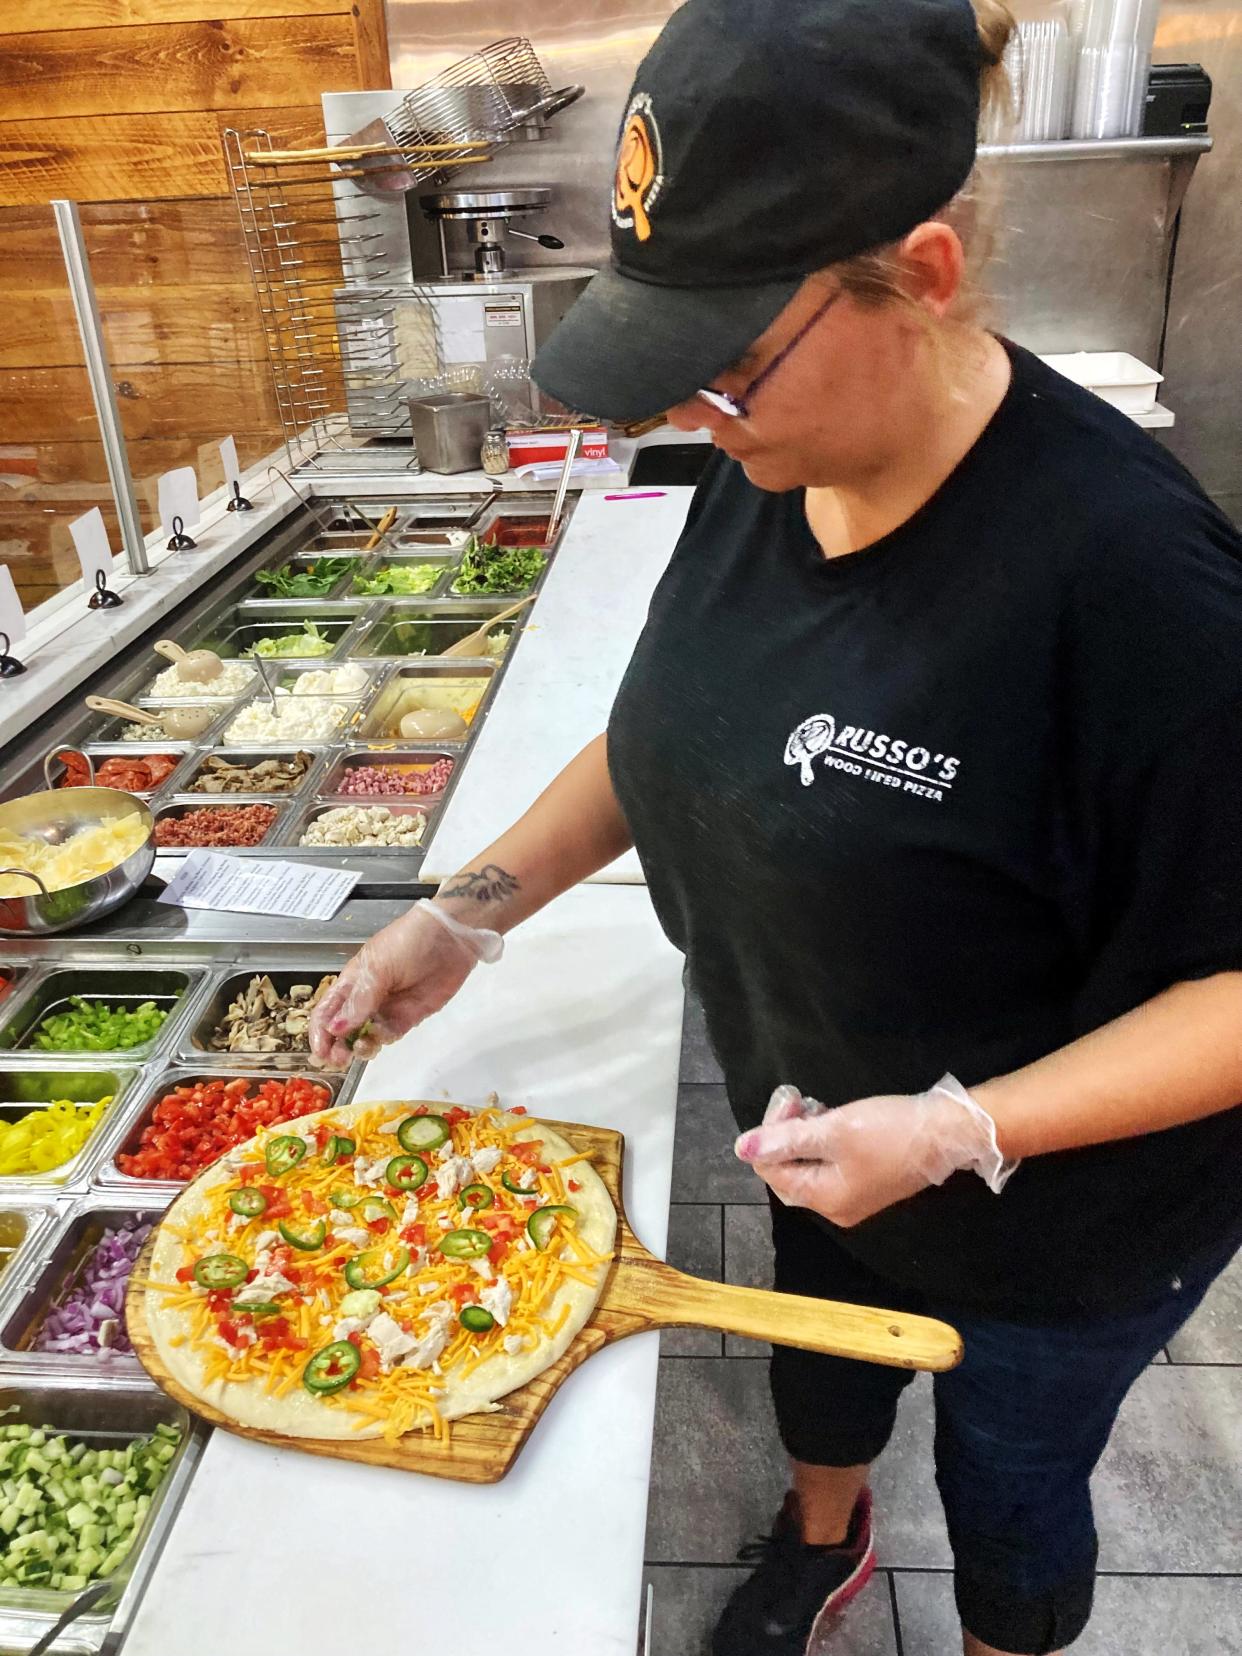 A worker builds the Santa Fe, a specialty item pizza at Russo's Wood Fired Pizza in Zanesville. The restaurant, owned by brothers Anthony and Vincent Russo, is among the many dealing with increased supply costs due to inflation.